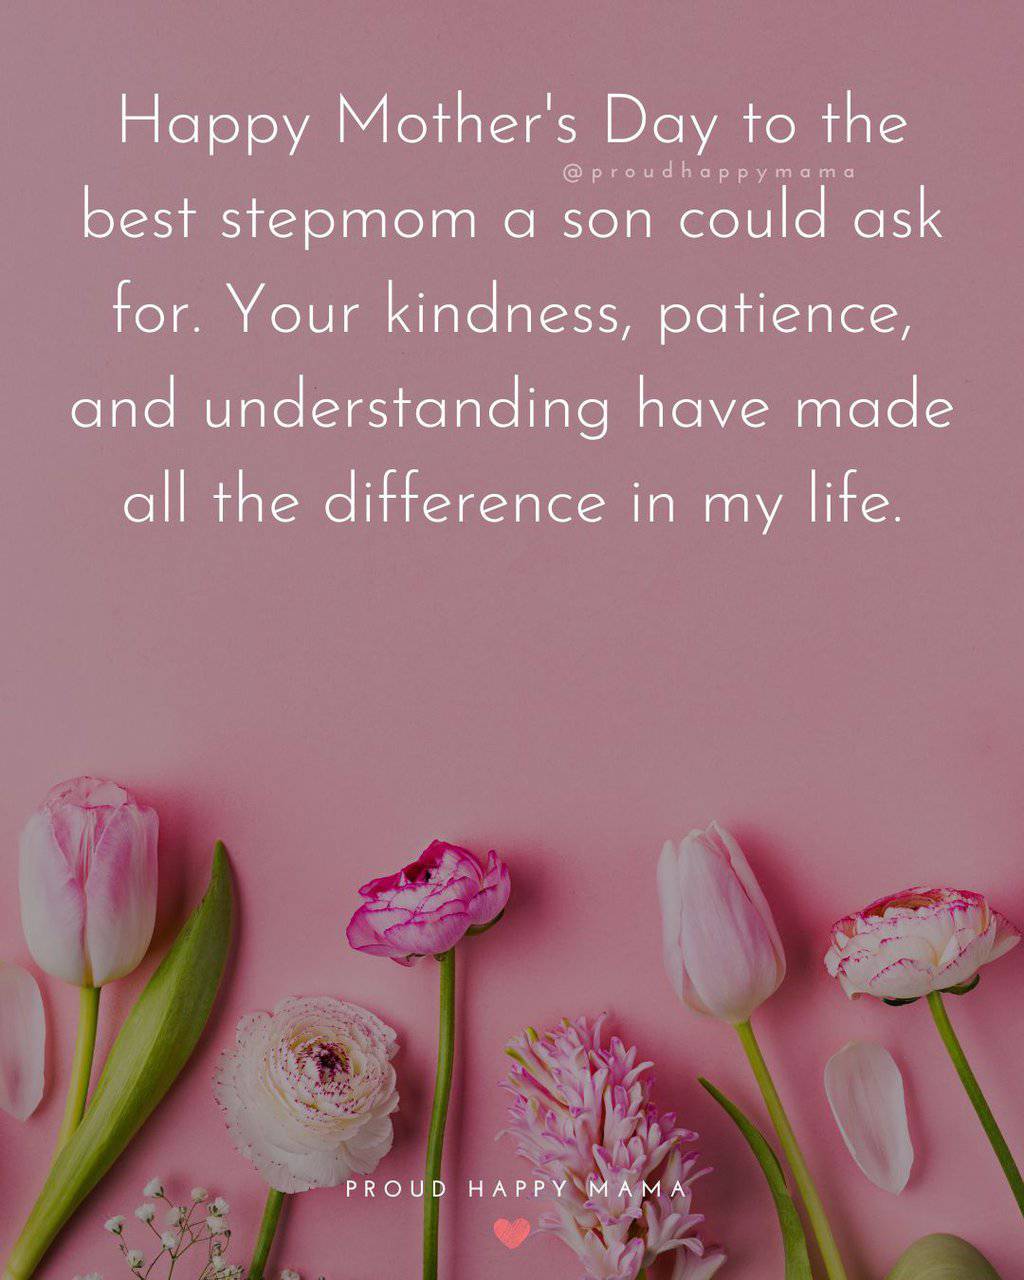 Mother's day quotes for stepmom from son